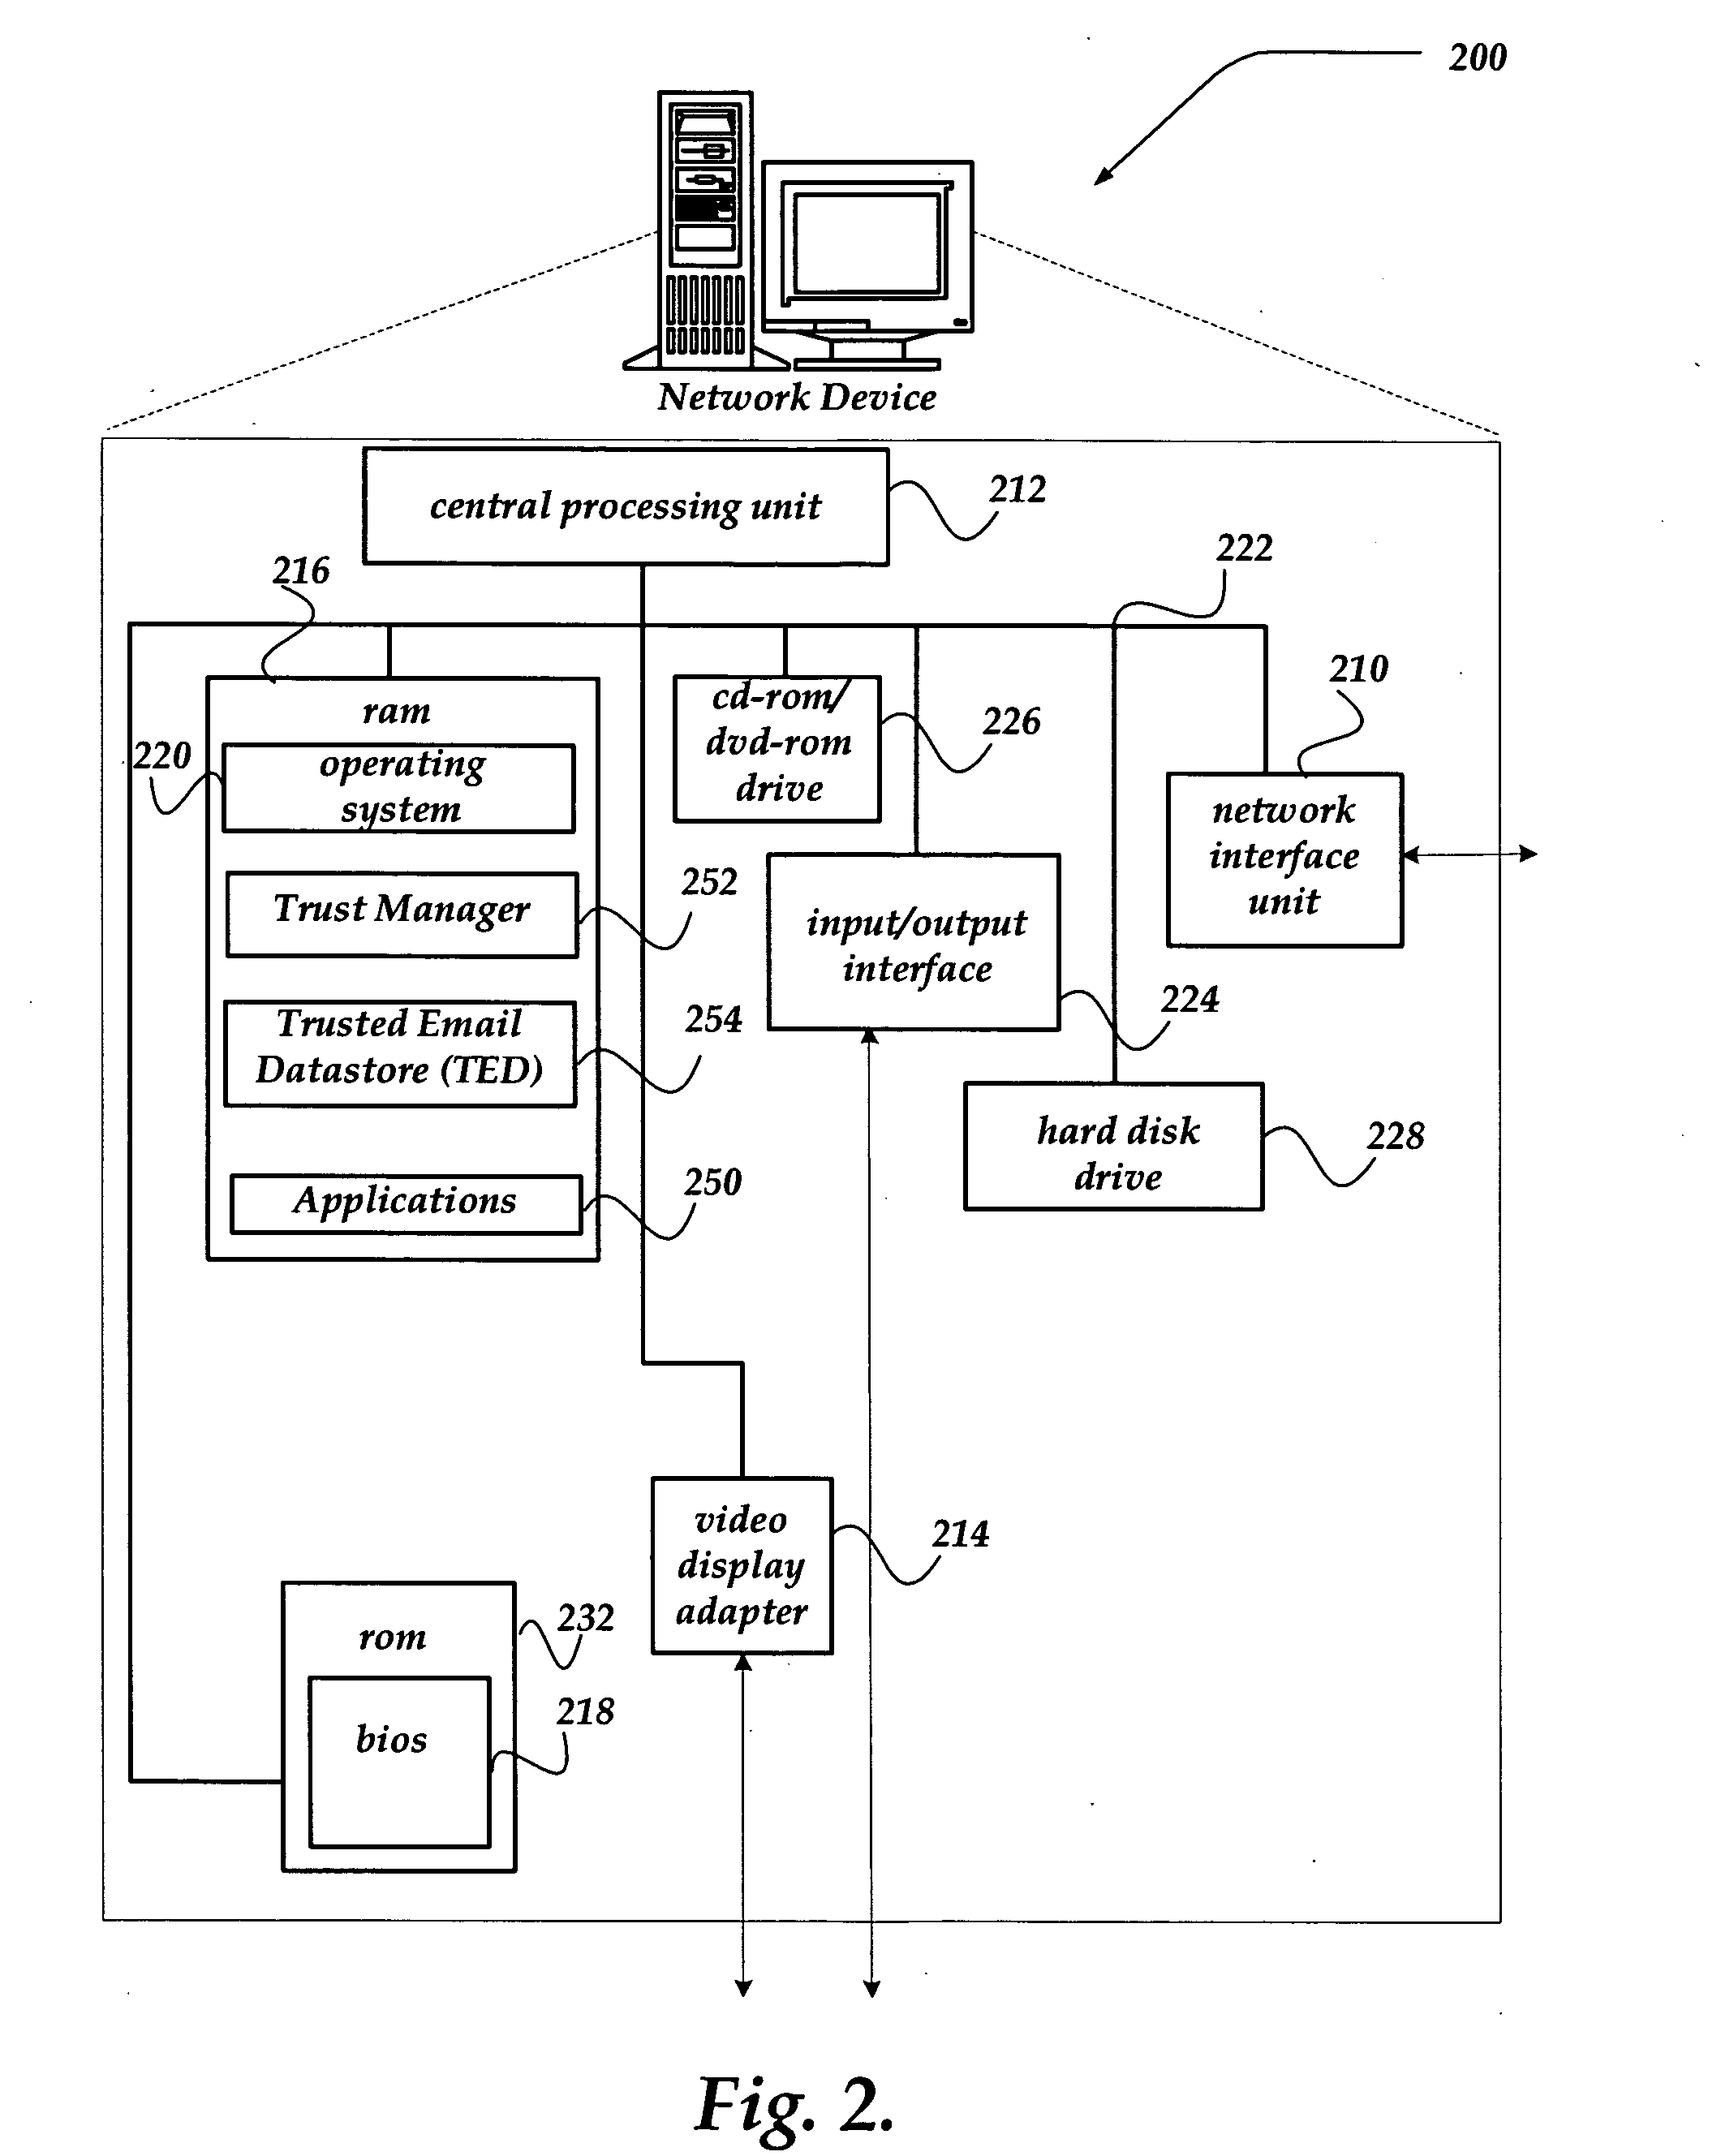 System and method for managing a trusted email datastore